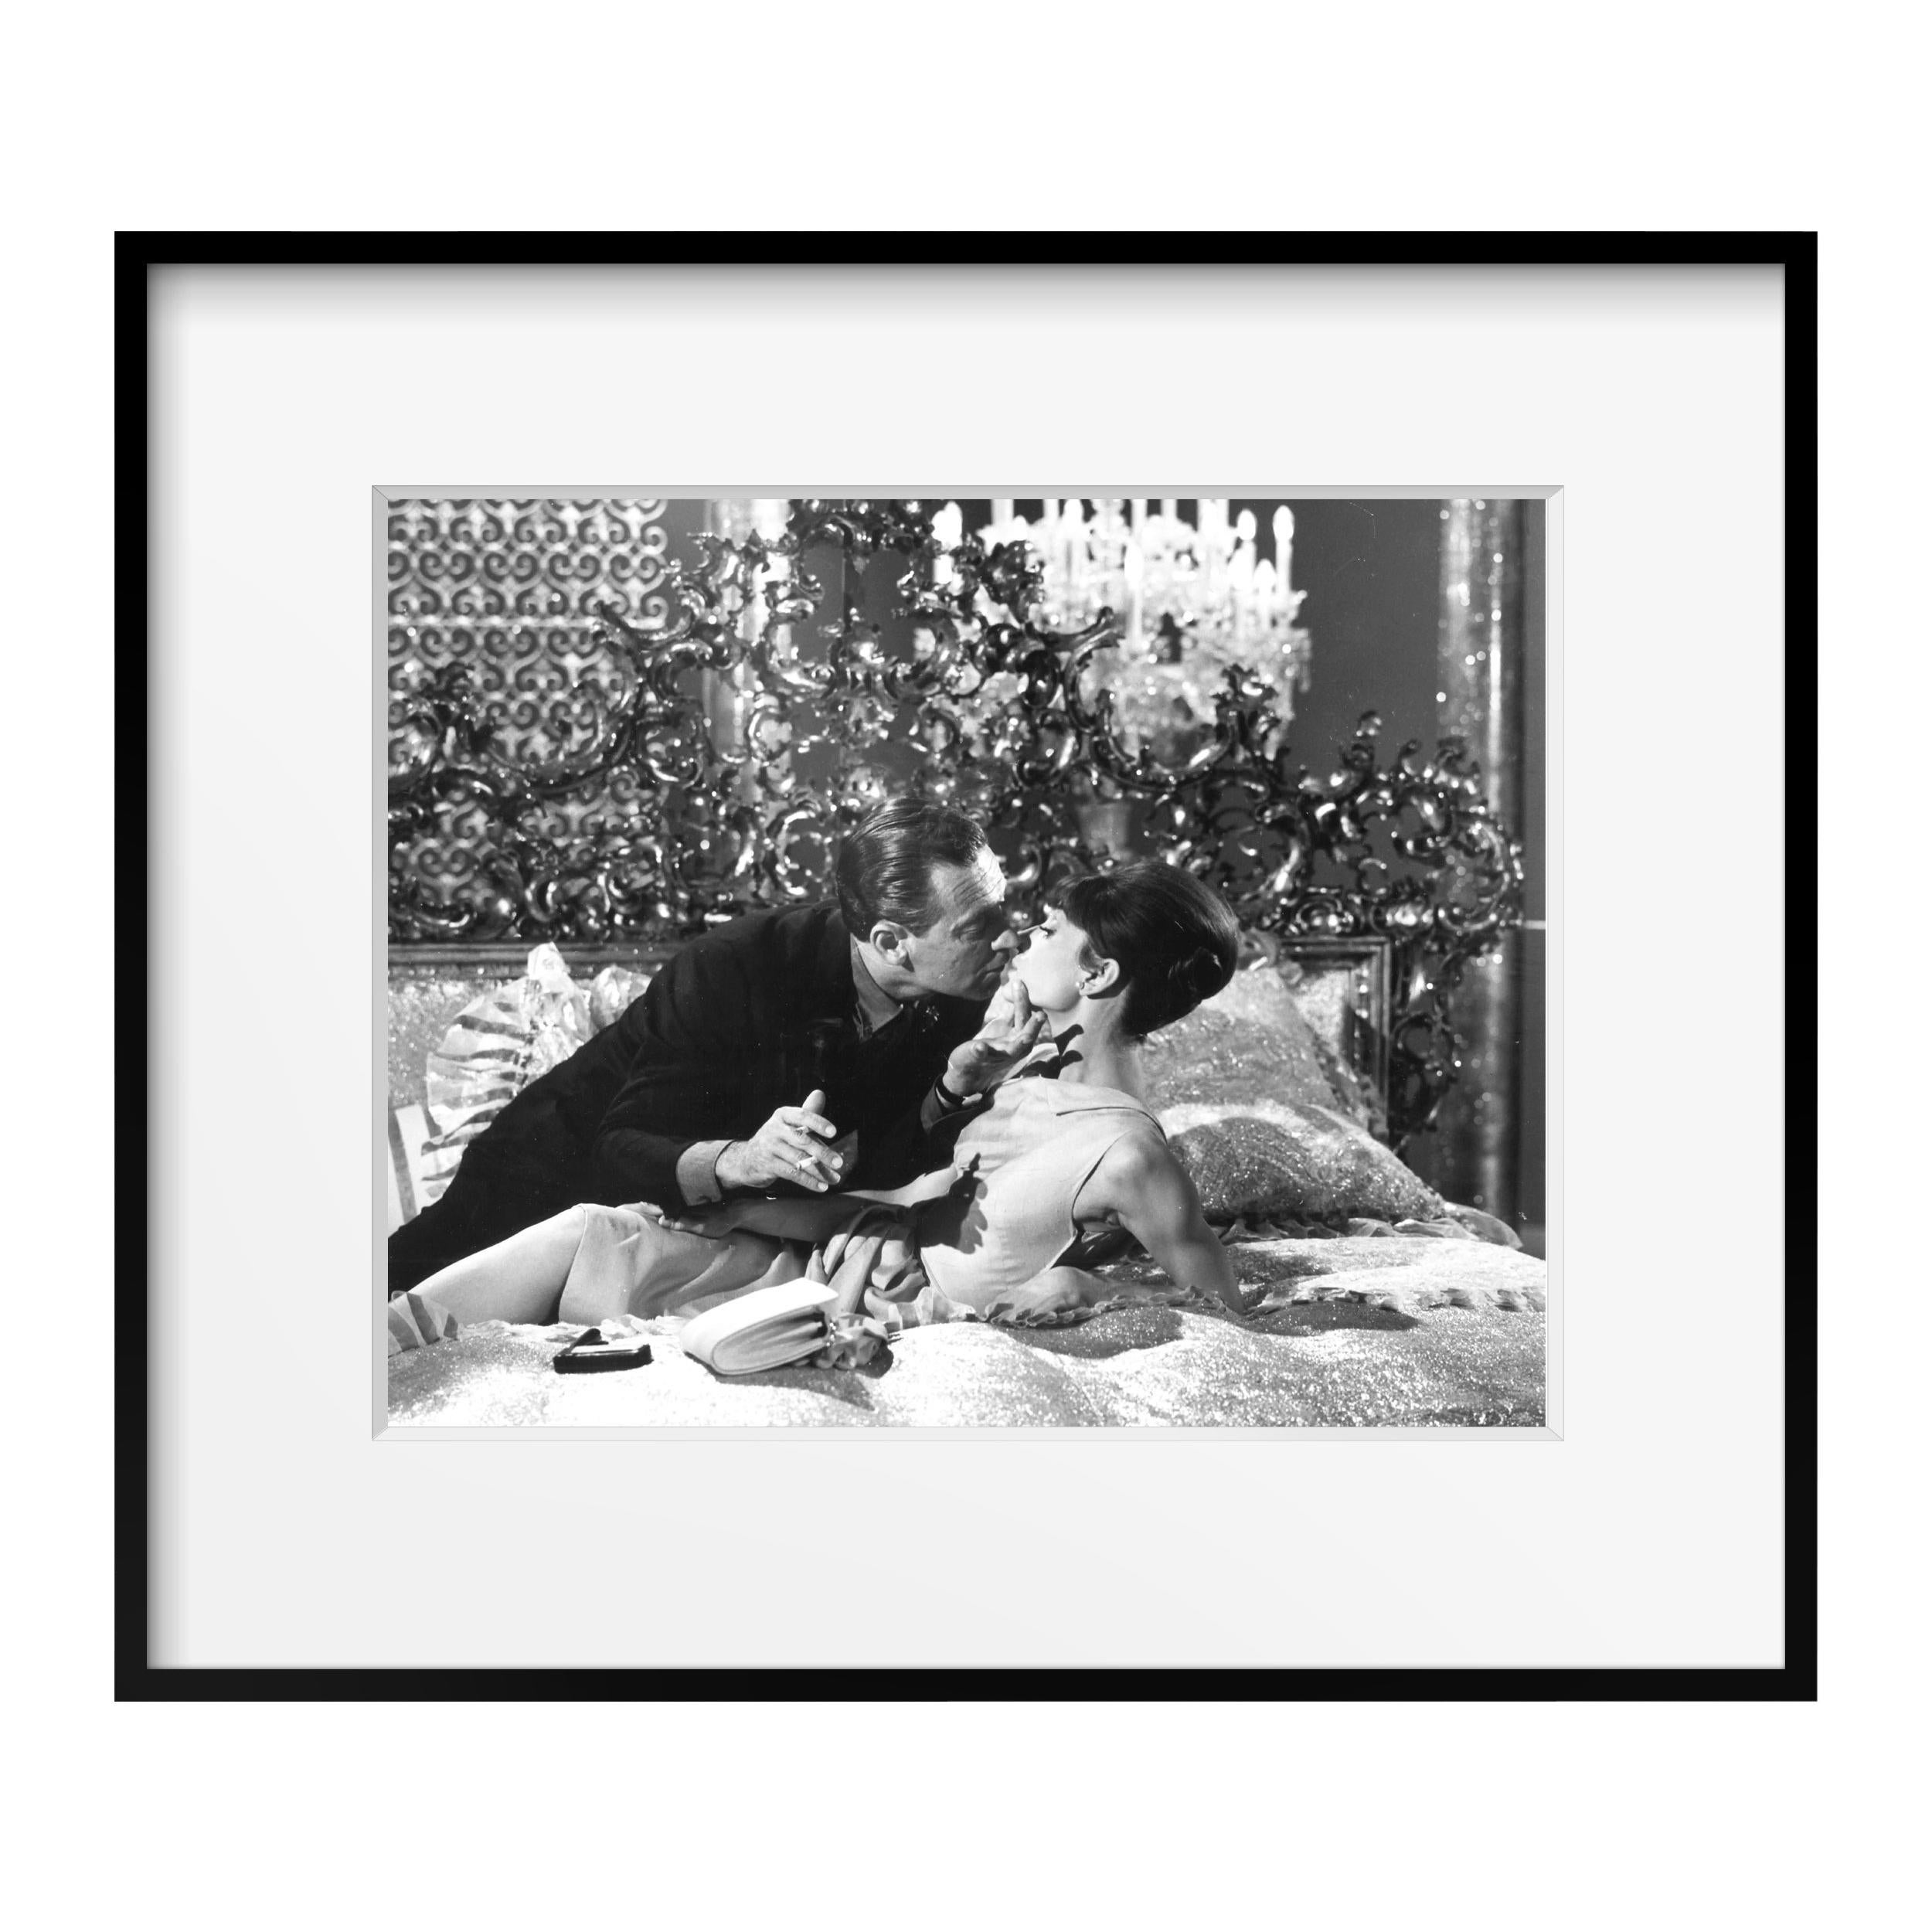 From the Personal collection of Audrey Hepburn, Christie's, September 2017
Audrey Hepburn and William Holden kiss on the set of 'Paris When it Sizzles,' Paris, 1962 by Vincent Rossell
Vintage gelatin silver print
Photographer's credit stamp,